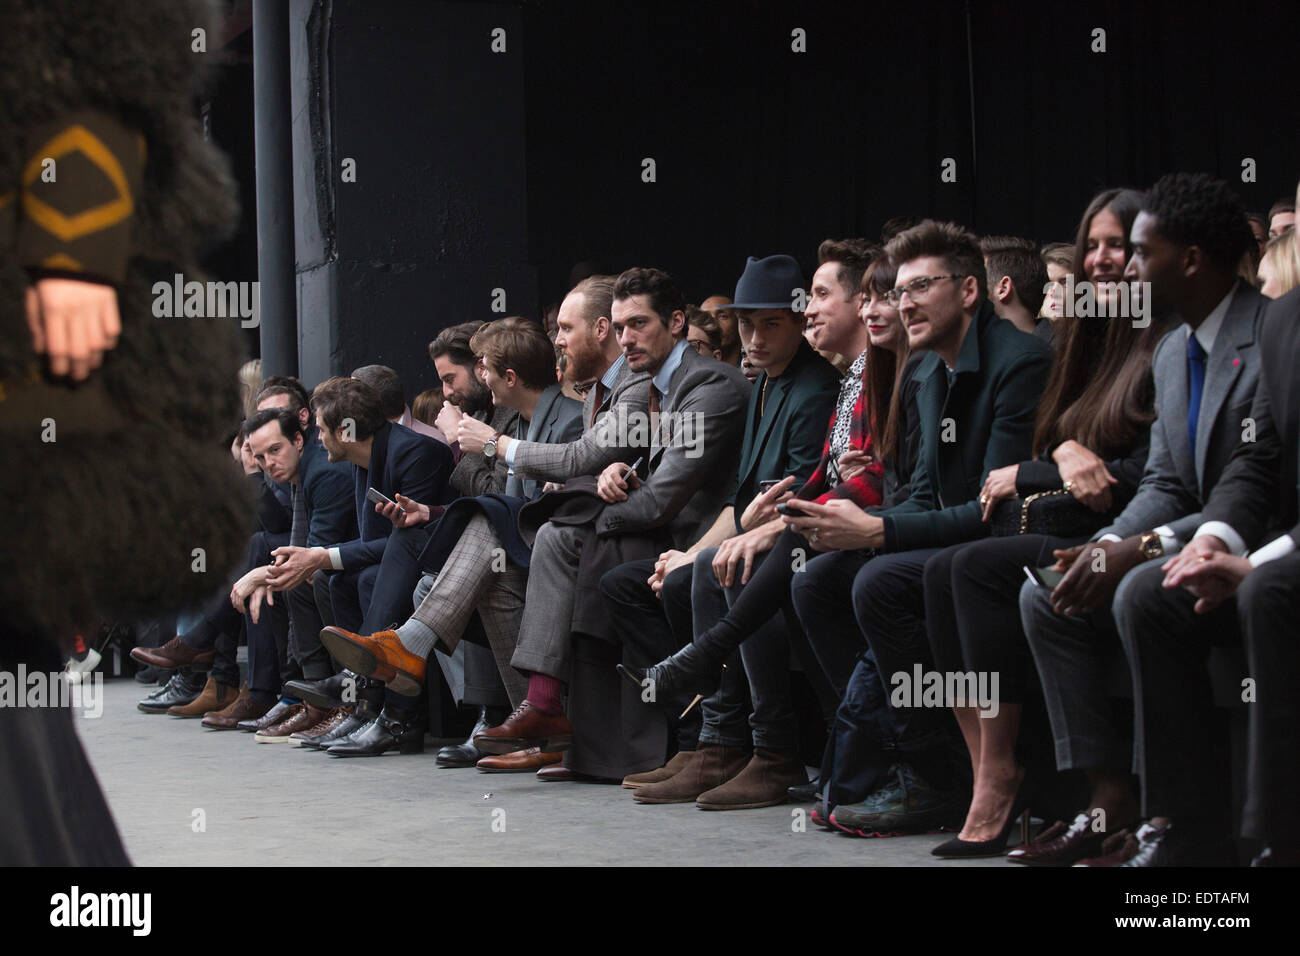 London, UK. 9 January 2015. Pictured: Front row celebrities with Oliver Cheshire, David Gandy, Henry Holland and Nick Grimshaw. The runway show of Topman Design at the Topshow Show Space: The Old Sorting Office opens the London Collections: Men fashion week in London. Photo: CatwalkFashion/Alamy Live News Stock Photo